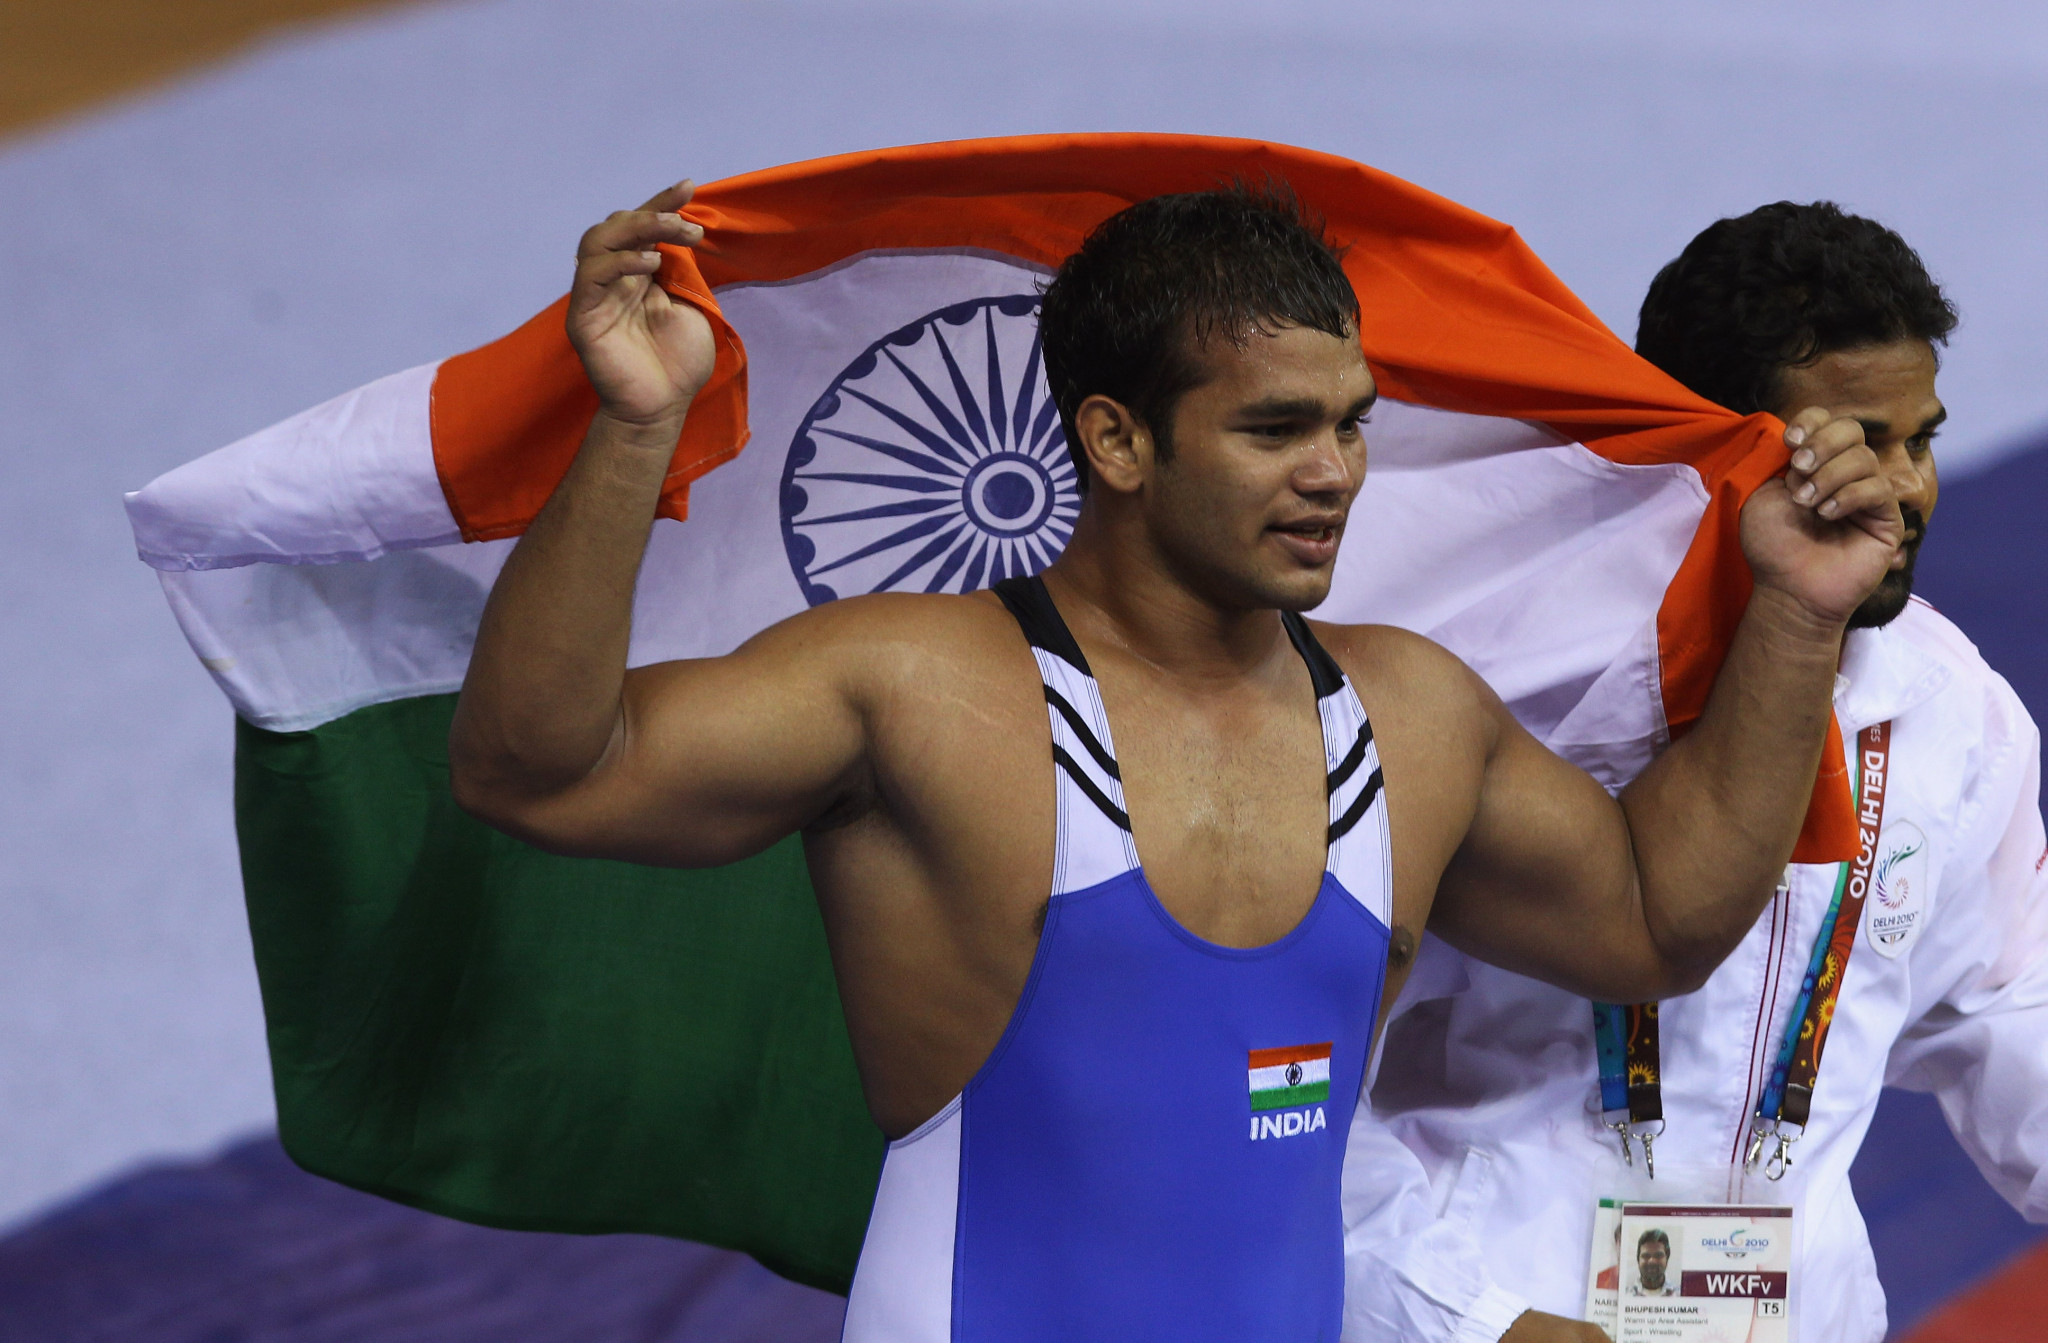 The Dehli High Court has ruled an investigation into banned Indian wrestler Narsingh Yadav must be conducted faster ©Getty Images